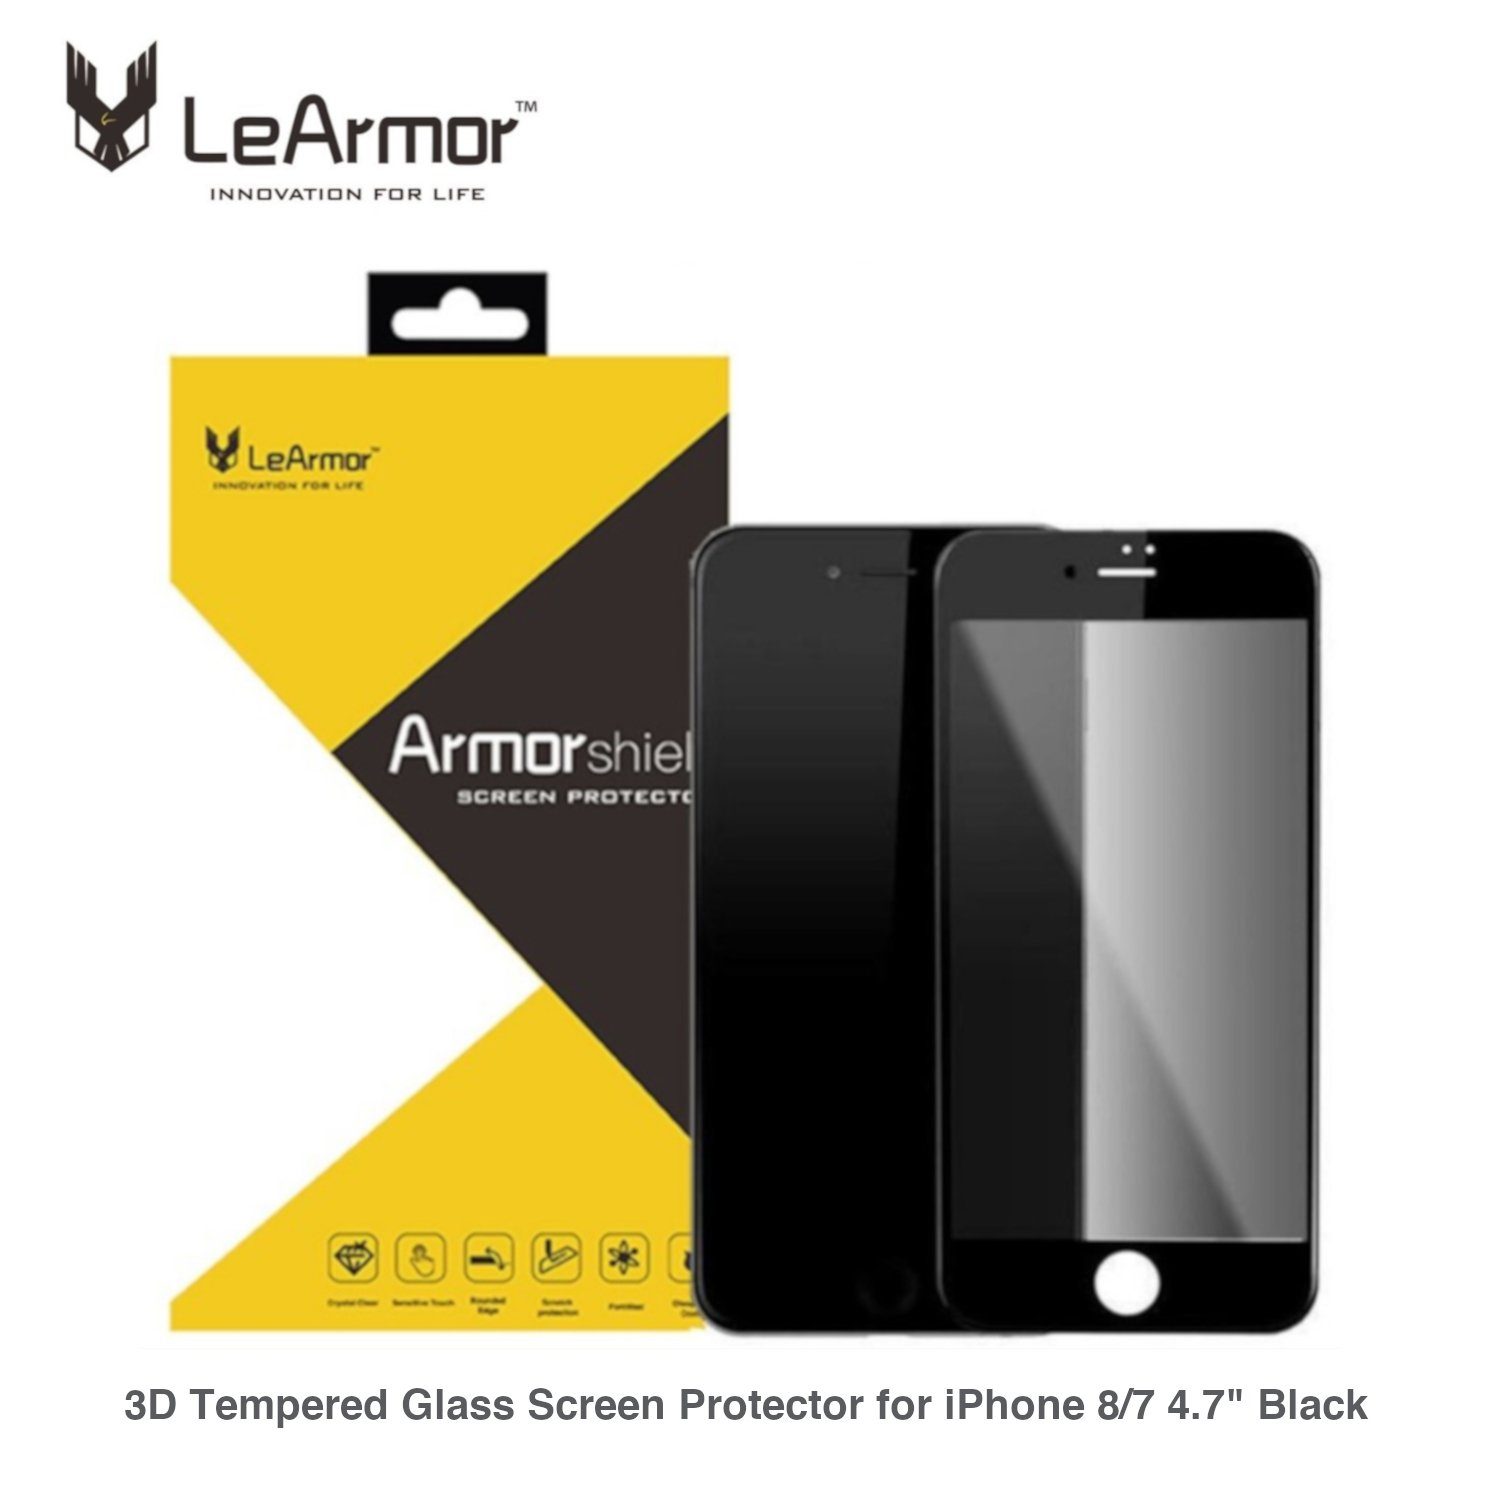 Full Cover Titanium Alloy Tempered Glass Screen Protector for iPhone 8 7 6S  Plus